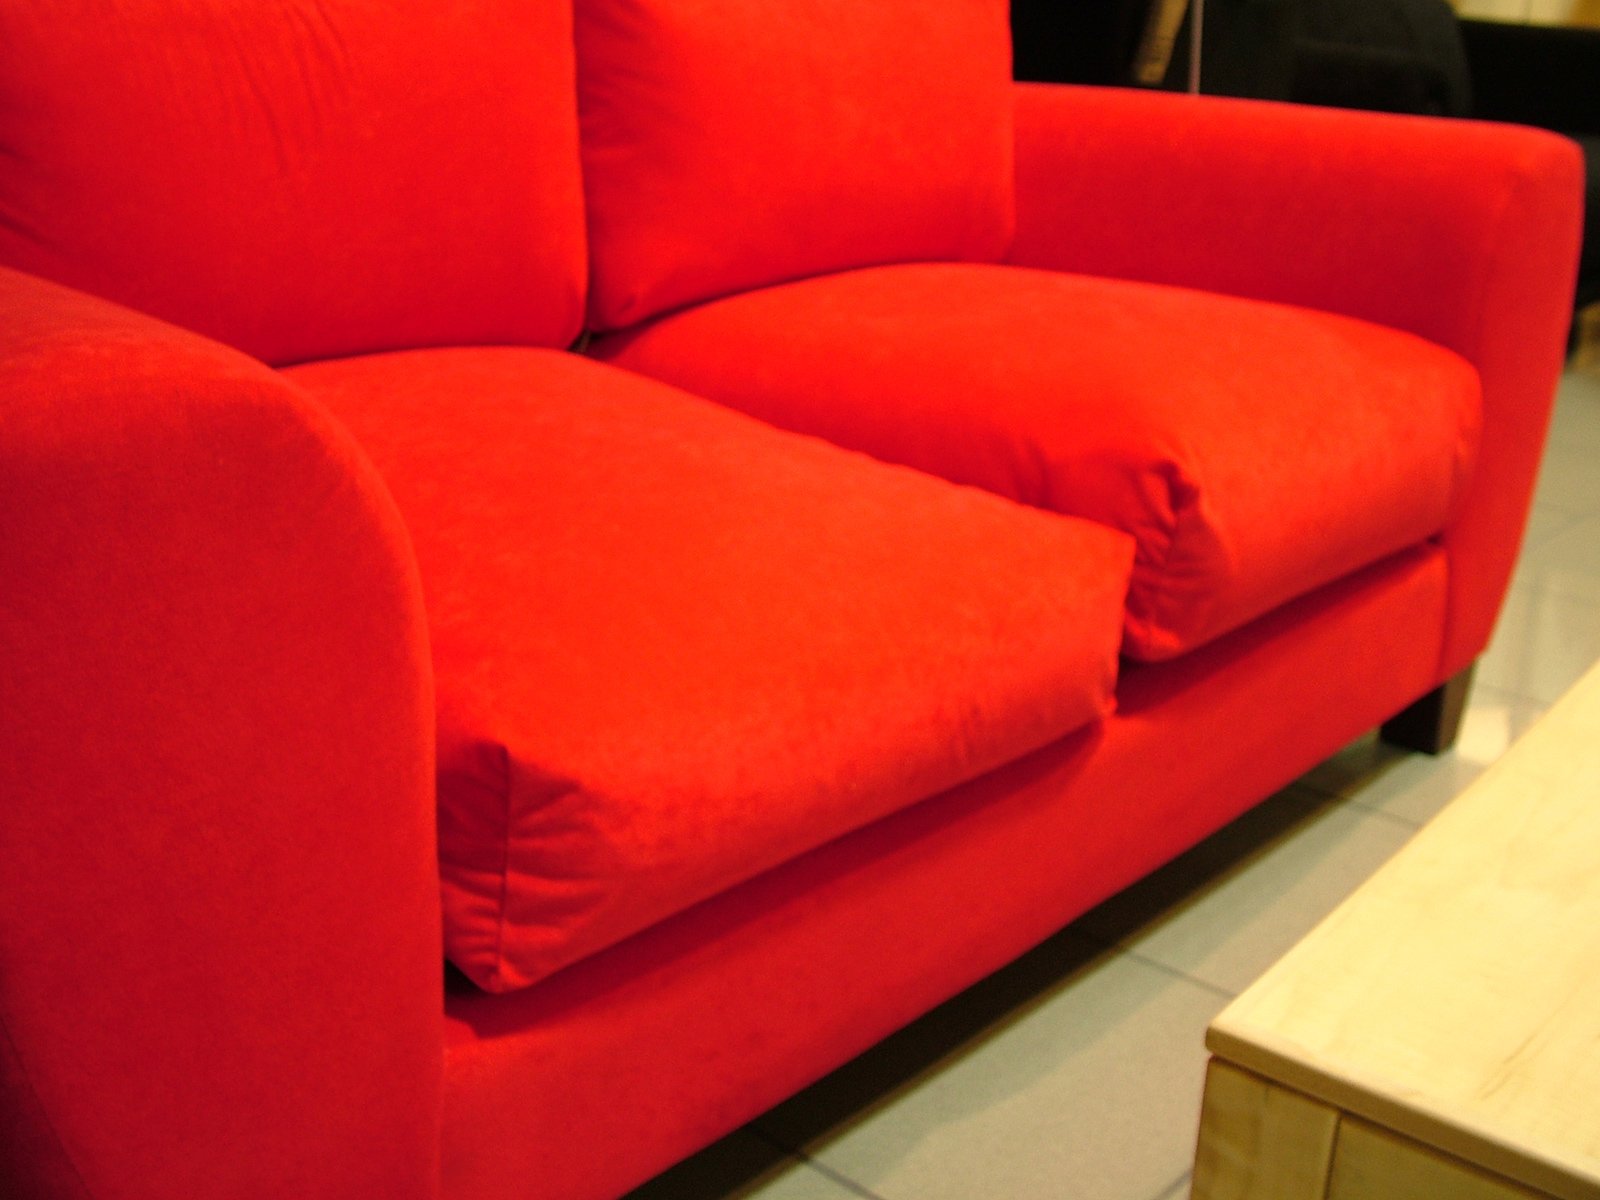 an orange couch with pillows, sits next to a table